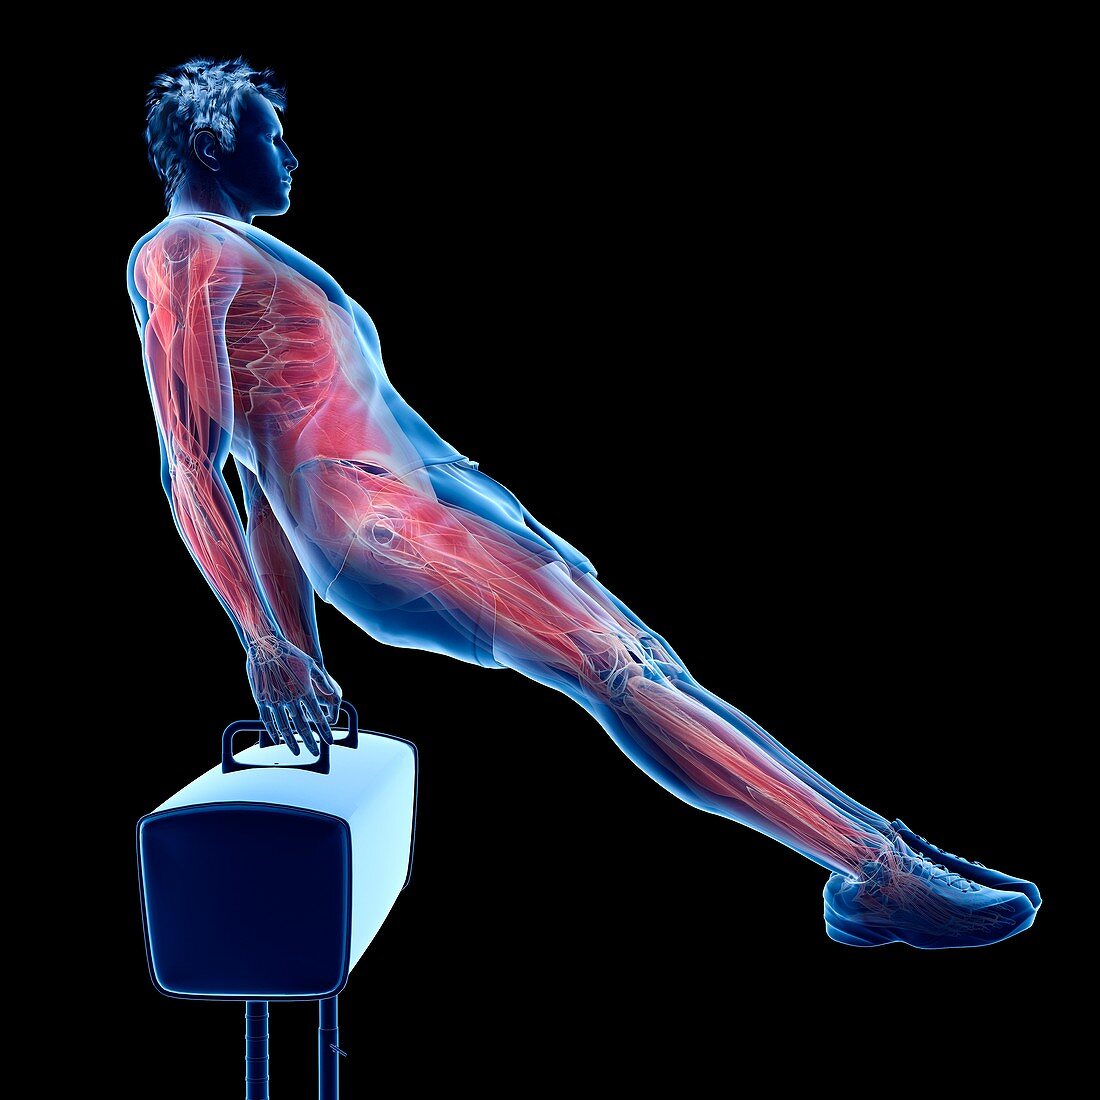 Gymnast's muscles, illustration